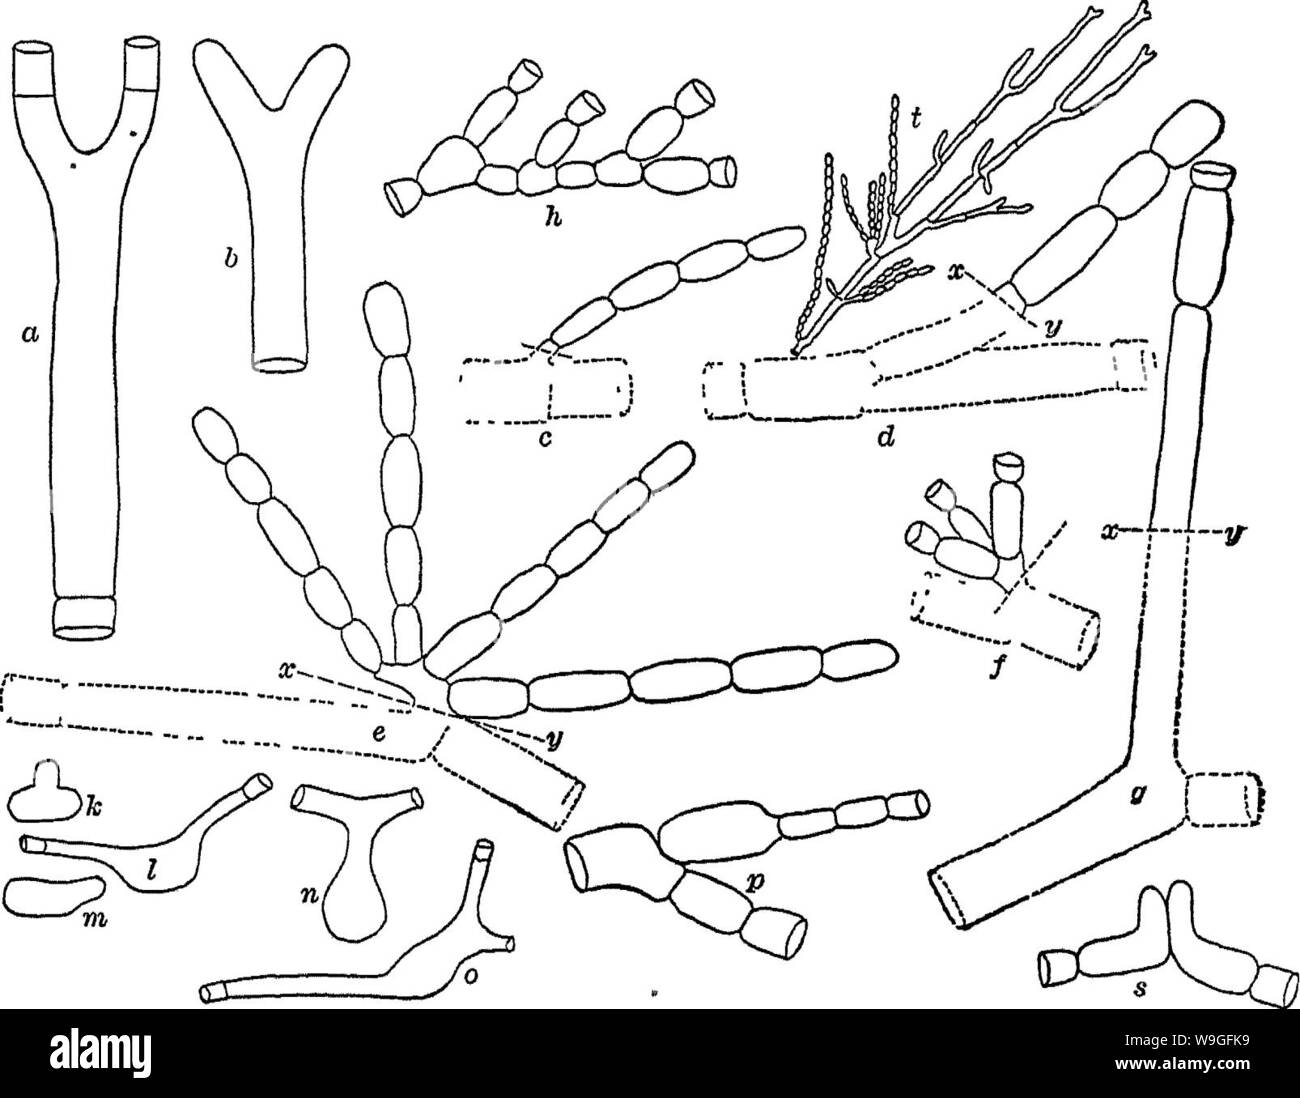 Archive image from page 213 of Bacteriology and mycology of foods Stock Photo